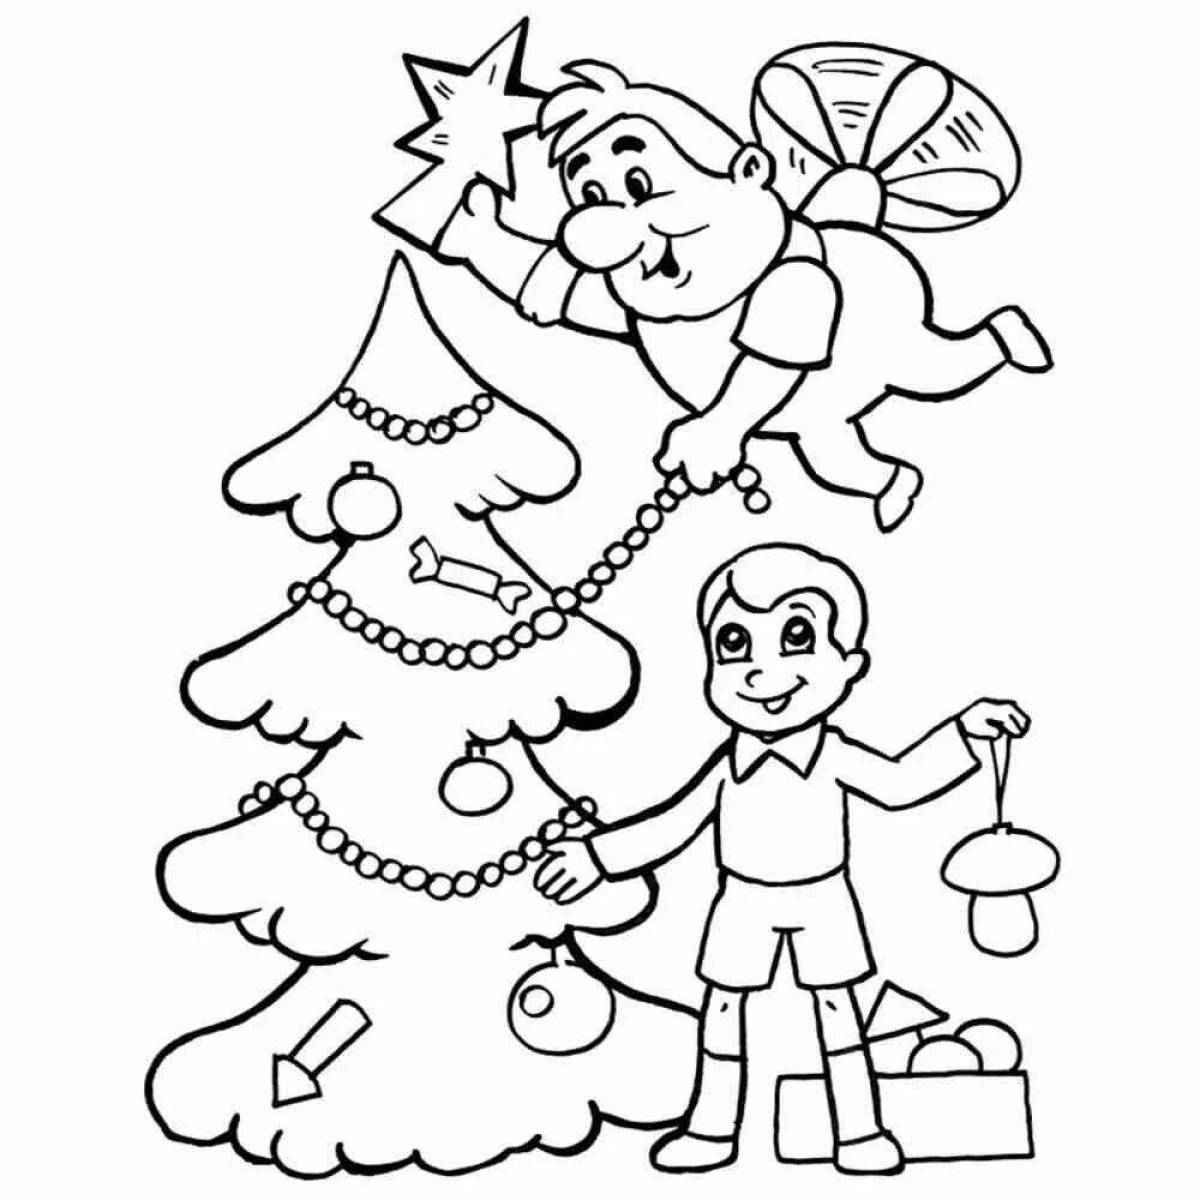 Christmas characters coloring book